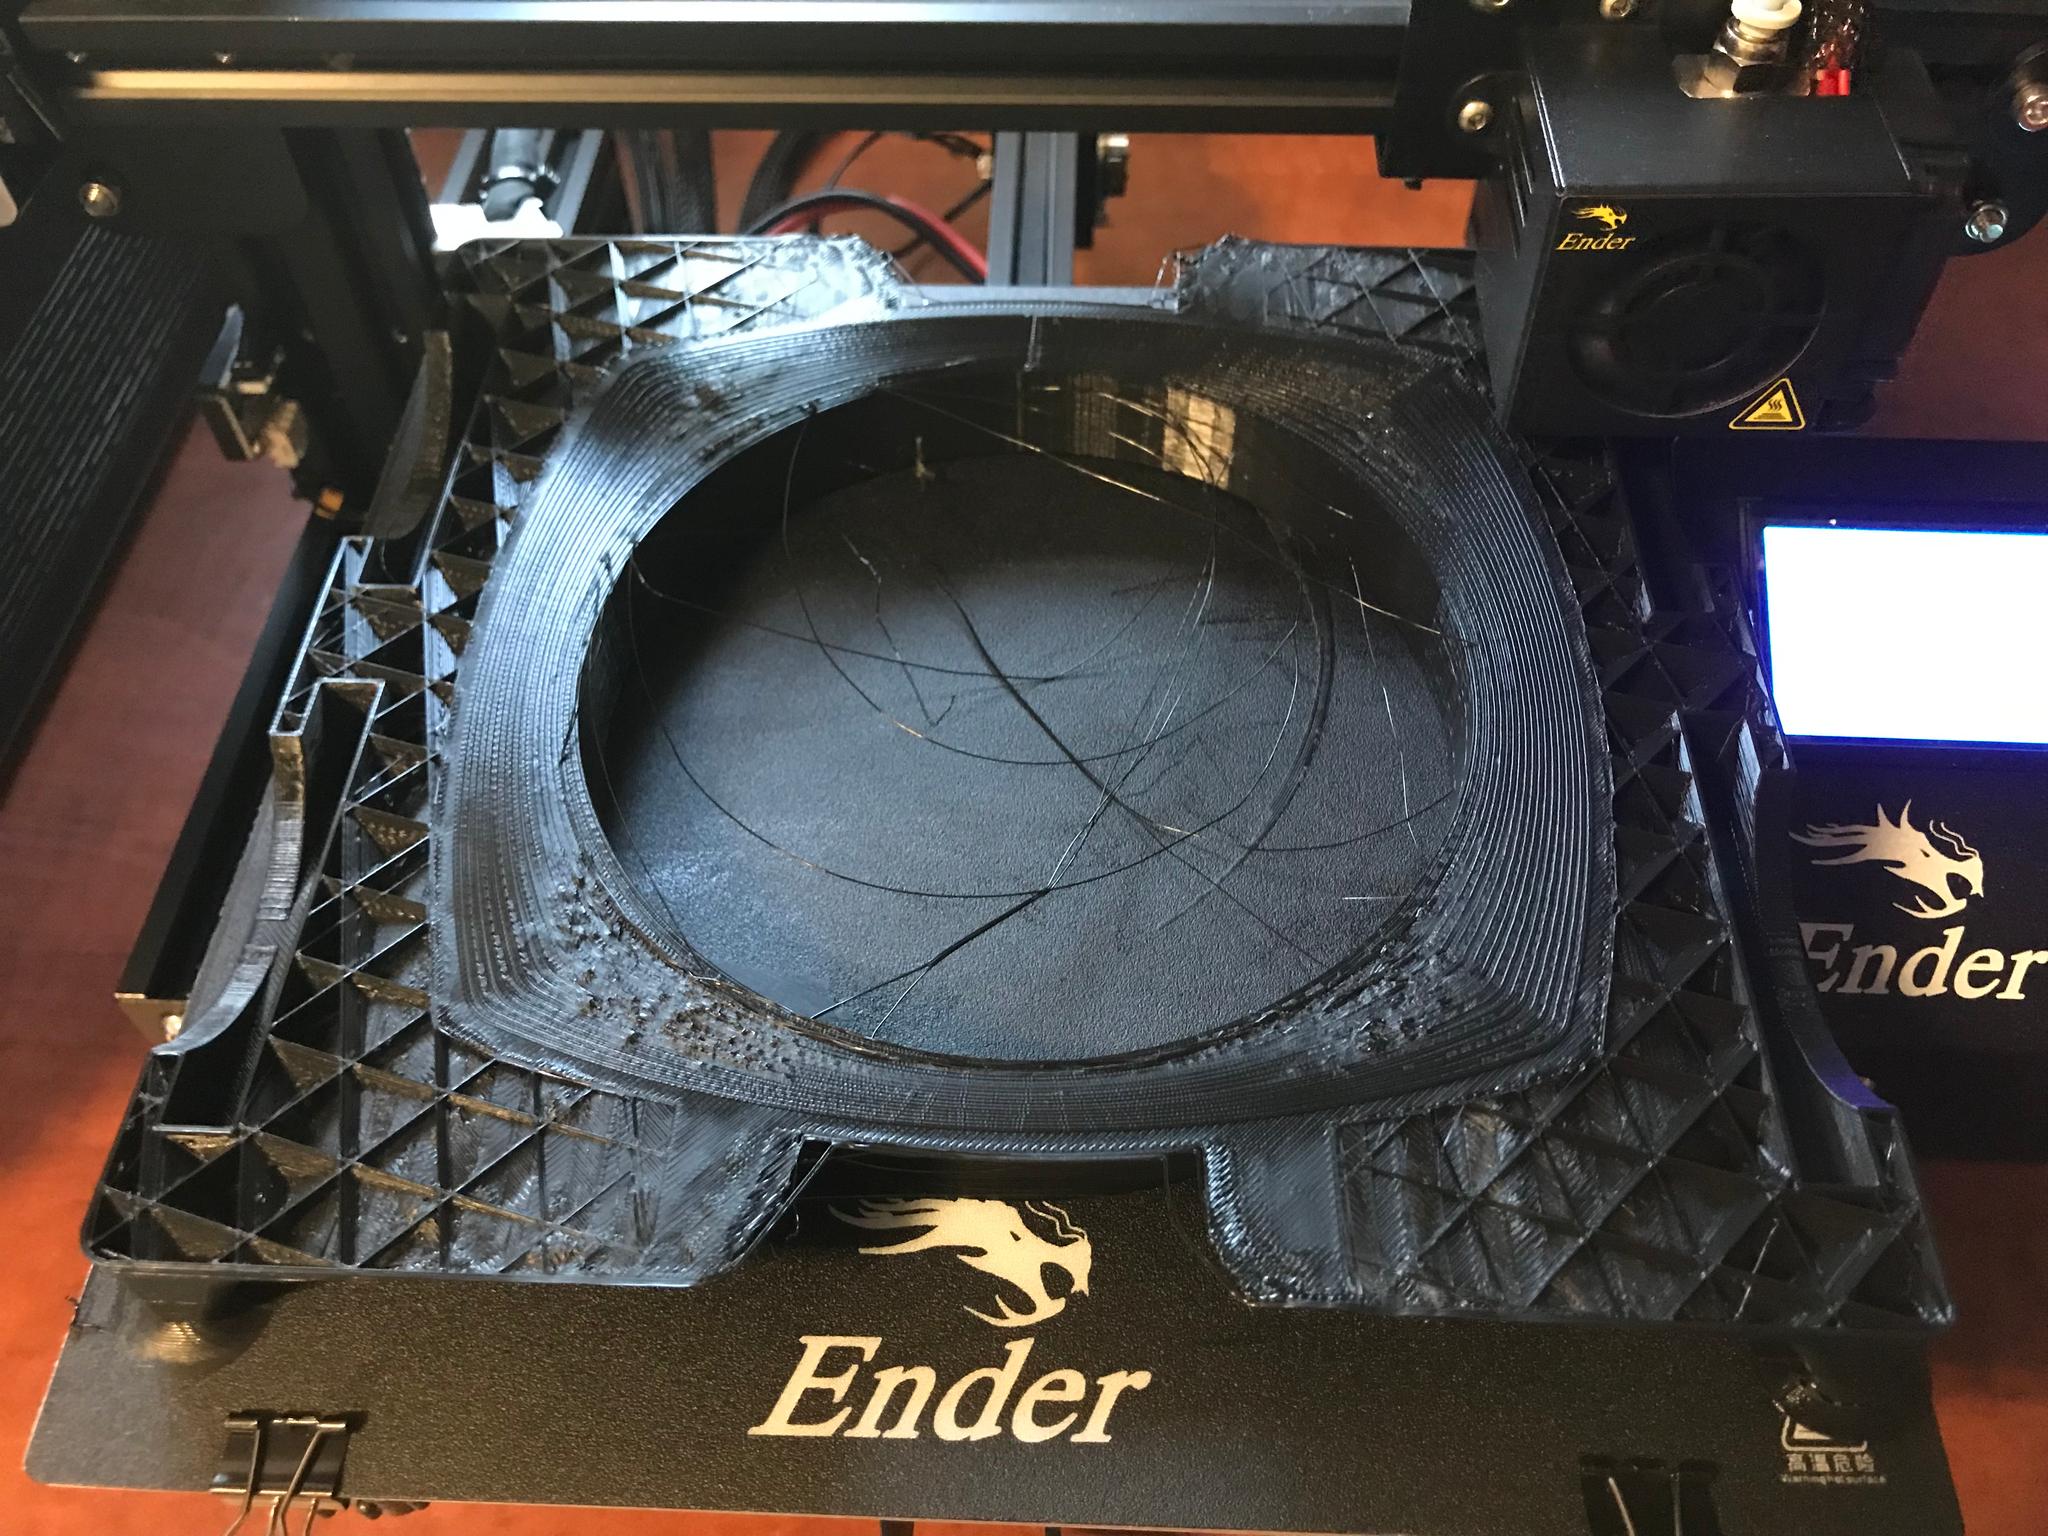 Defects already present during lower portion of print.